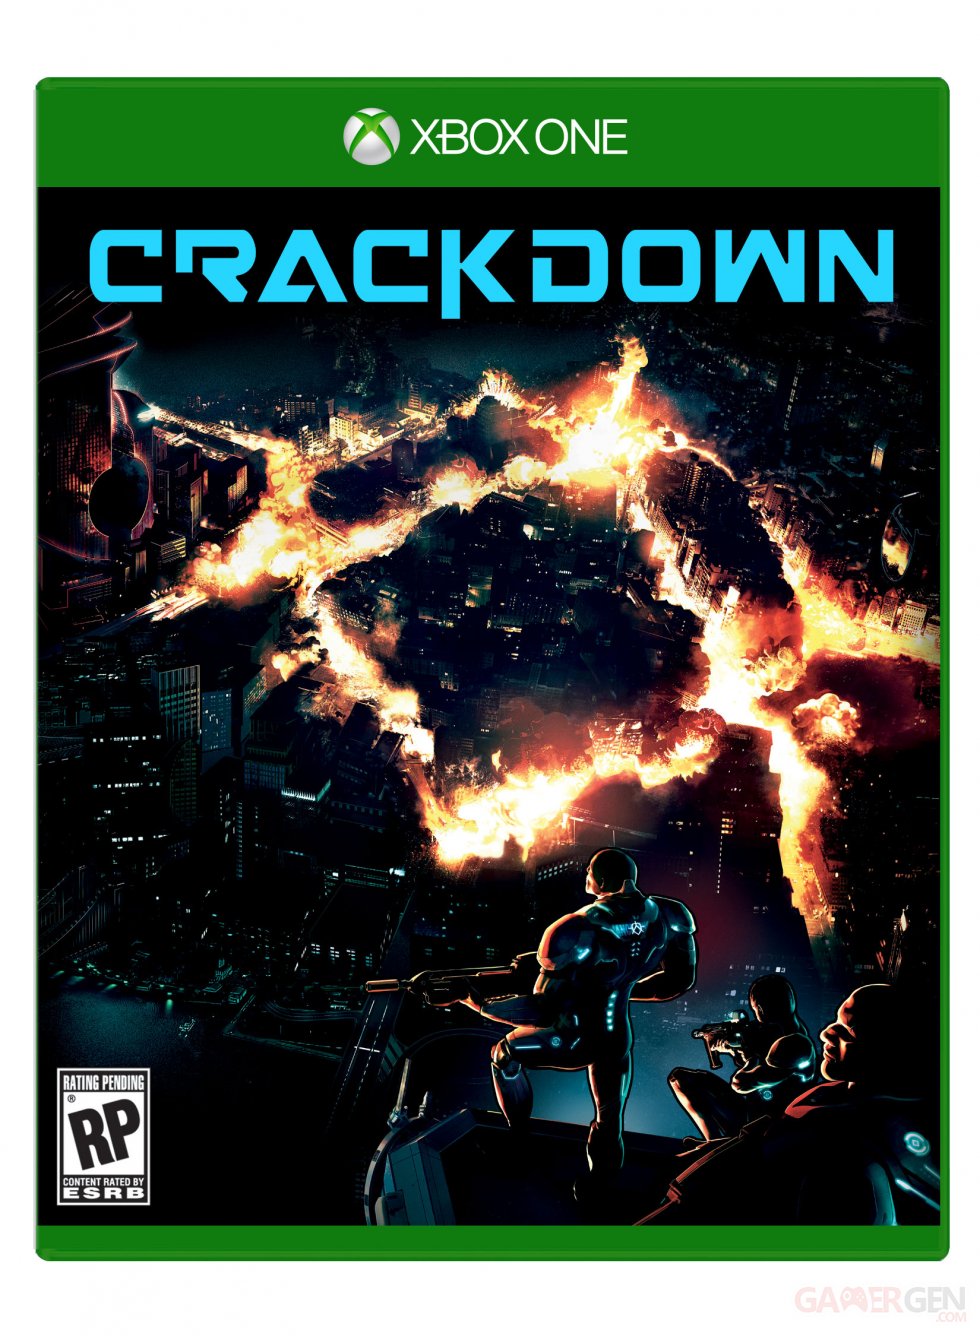 CRACKDOWN-PACK-FRONT-2D-FOB-RGB-png-1